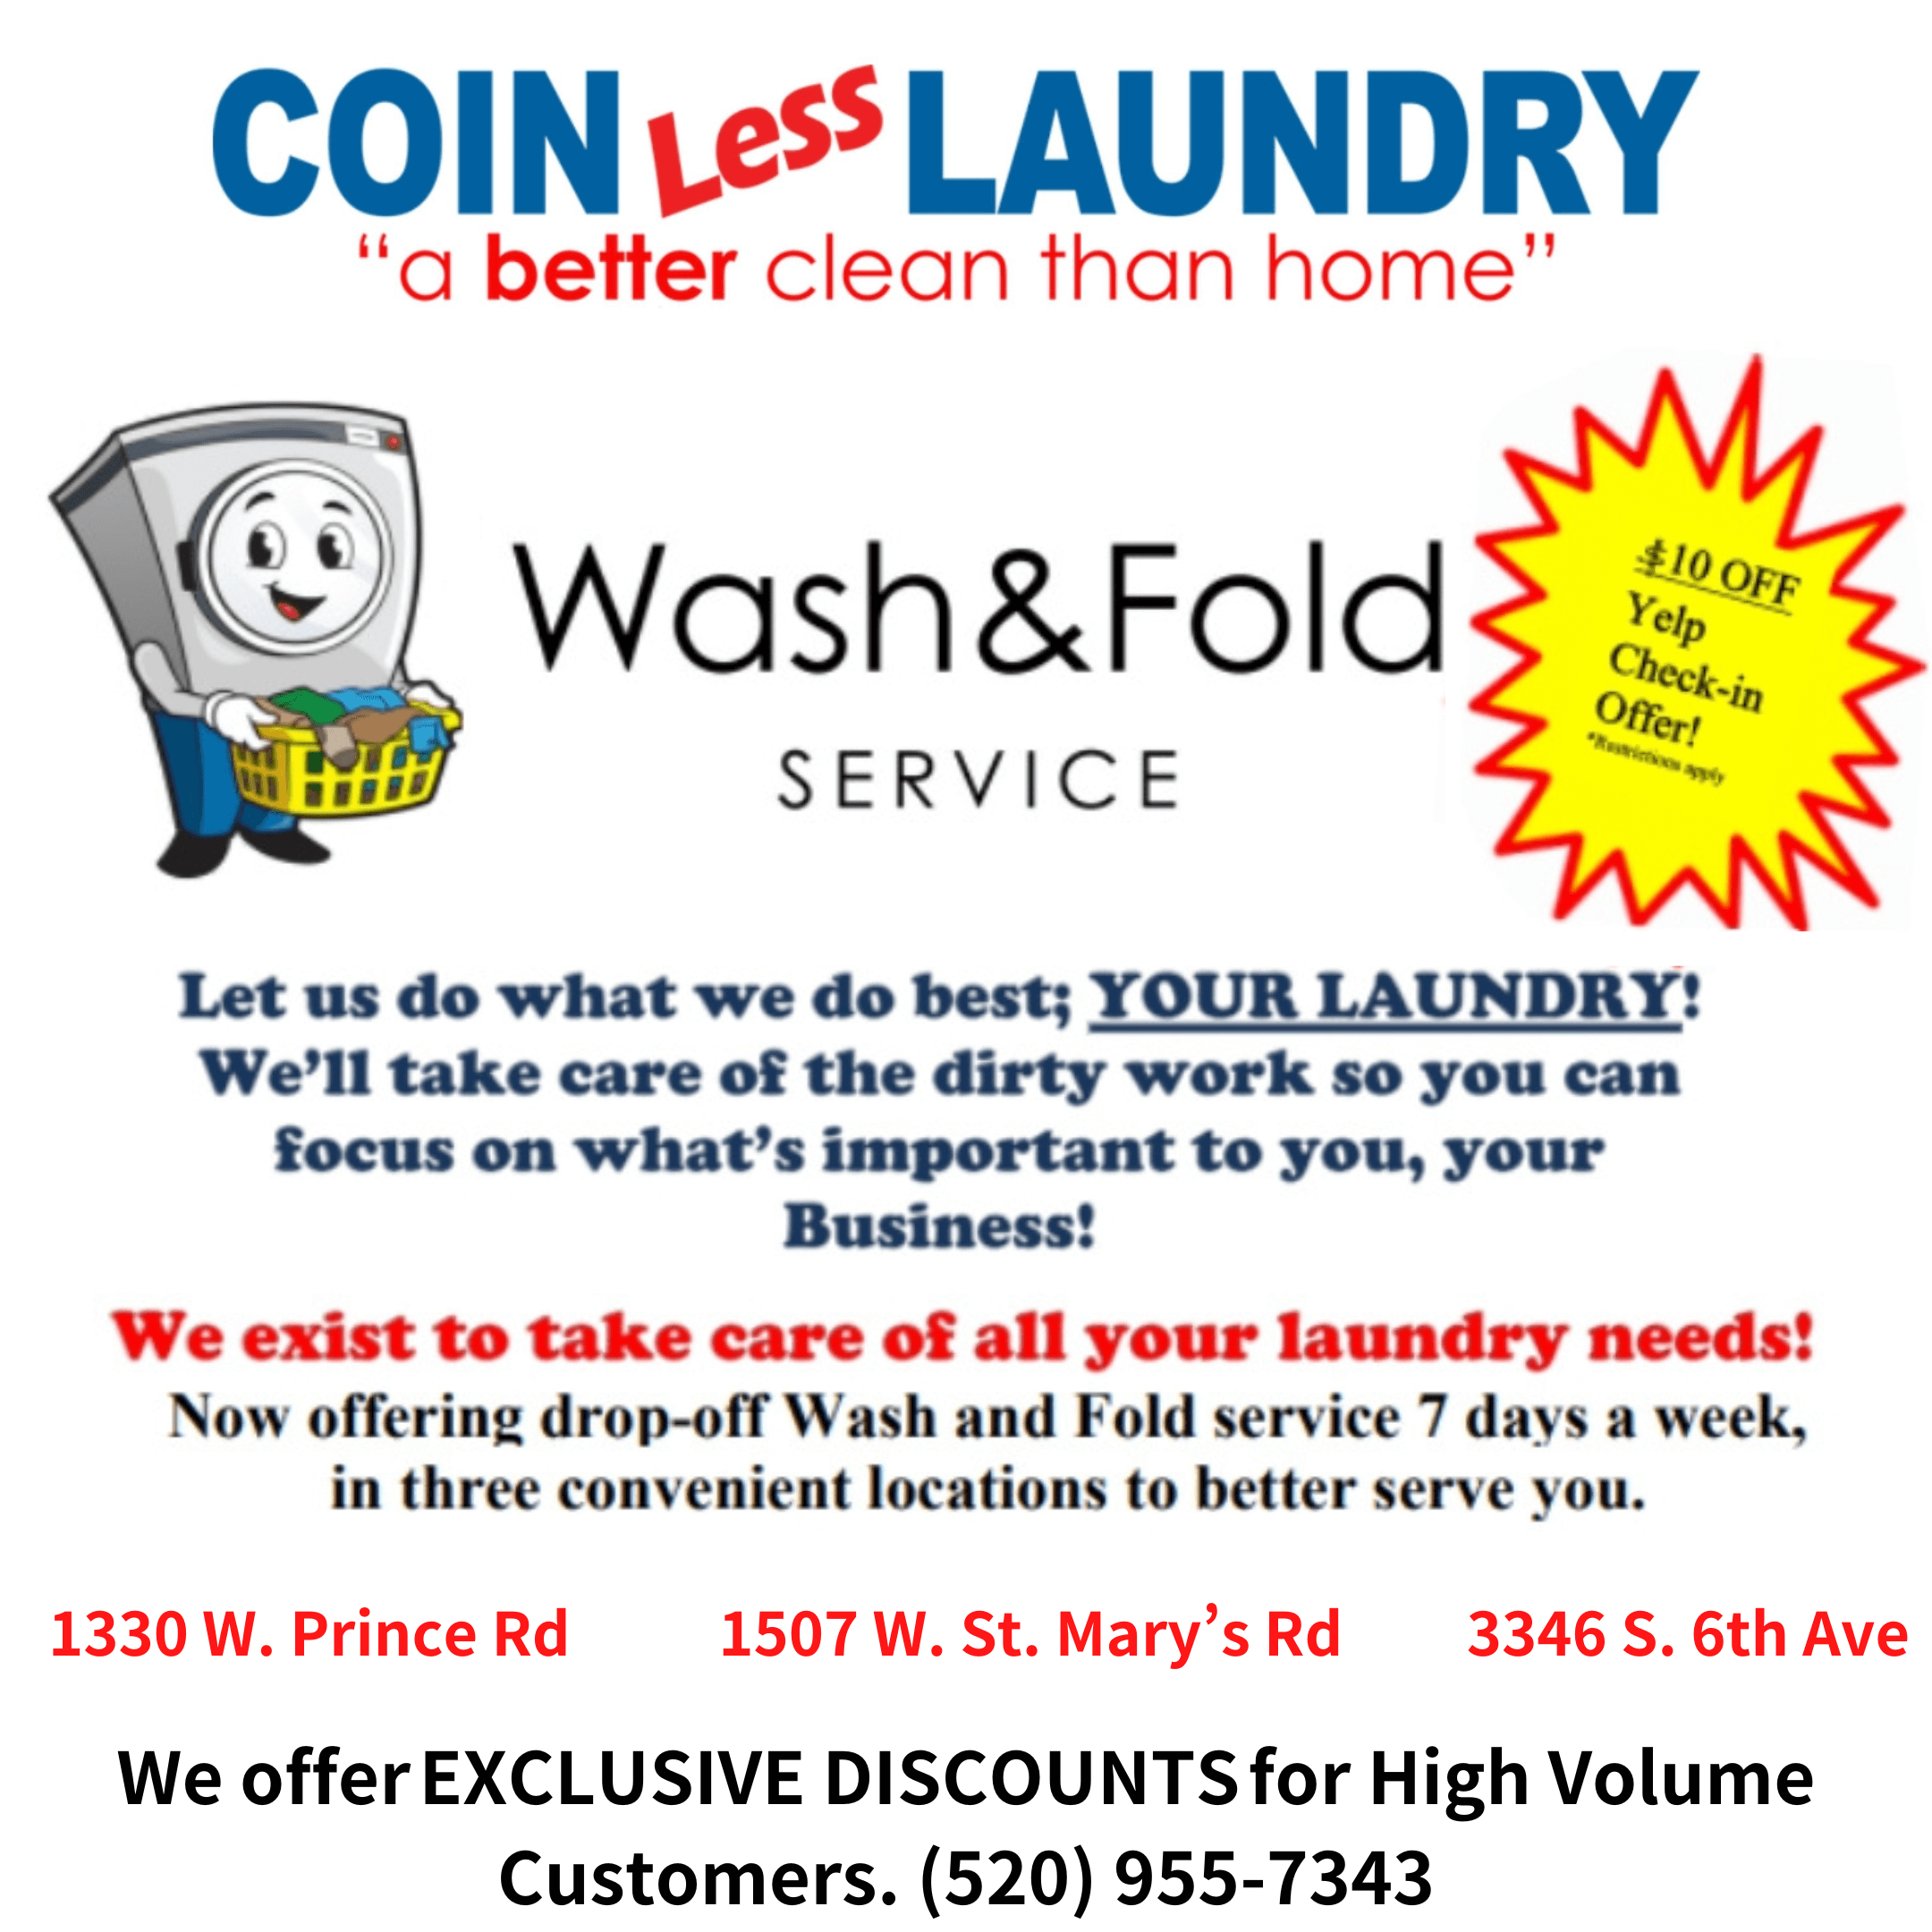 COIN LESS LAUNDRY